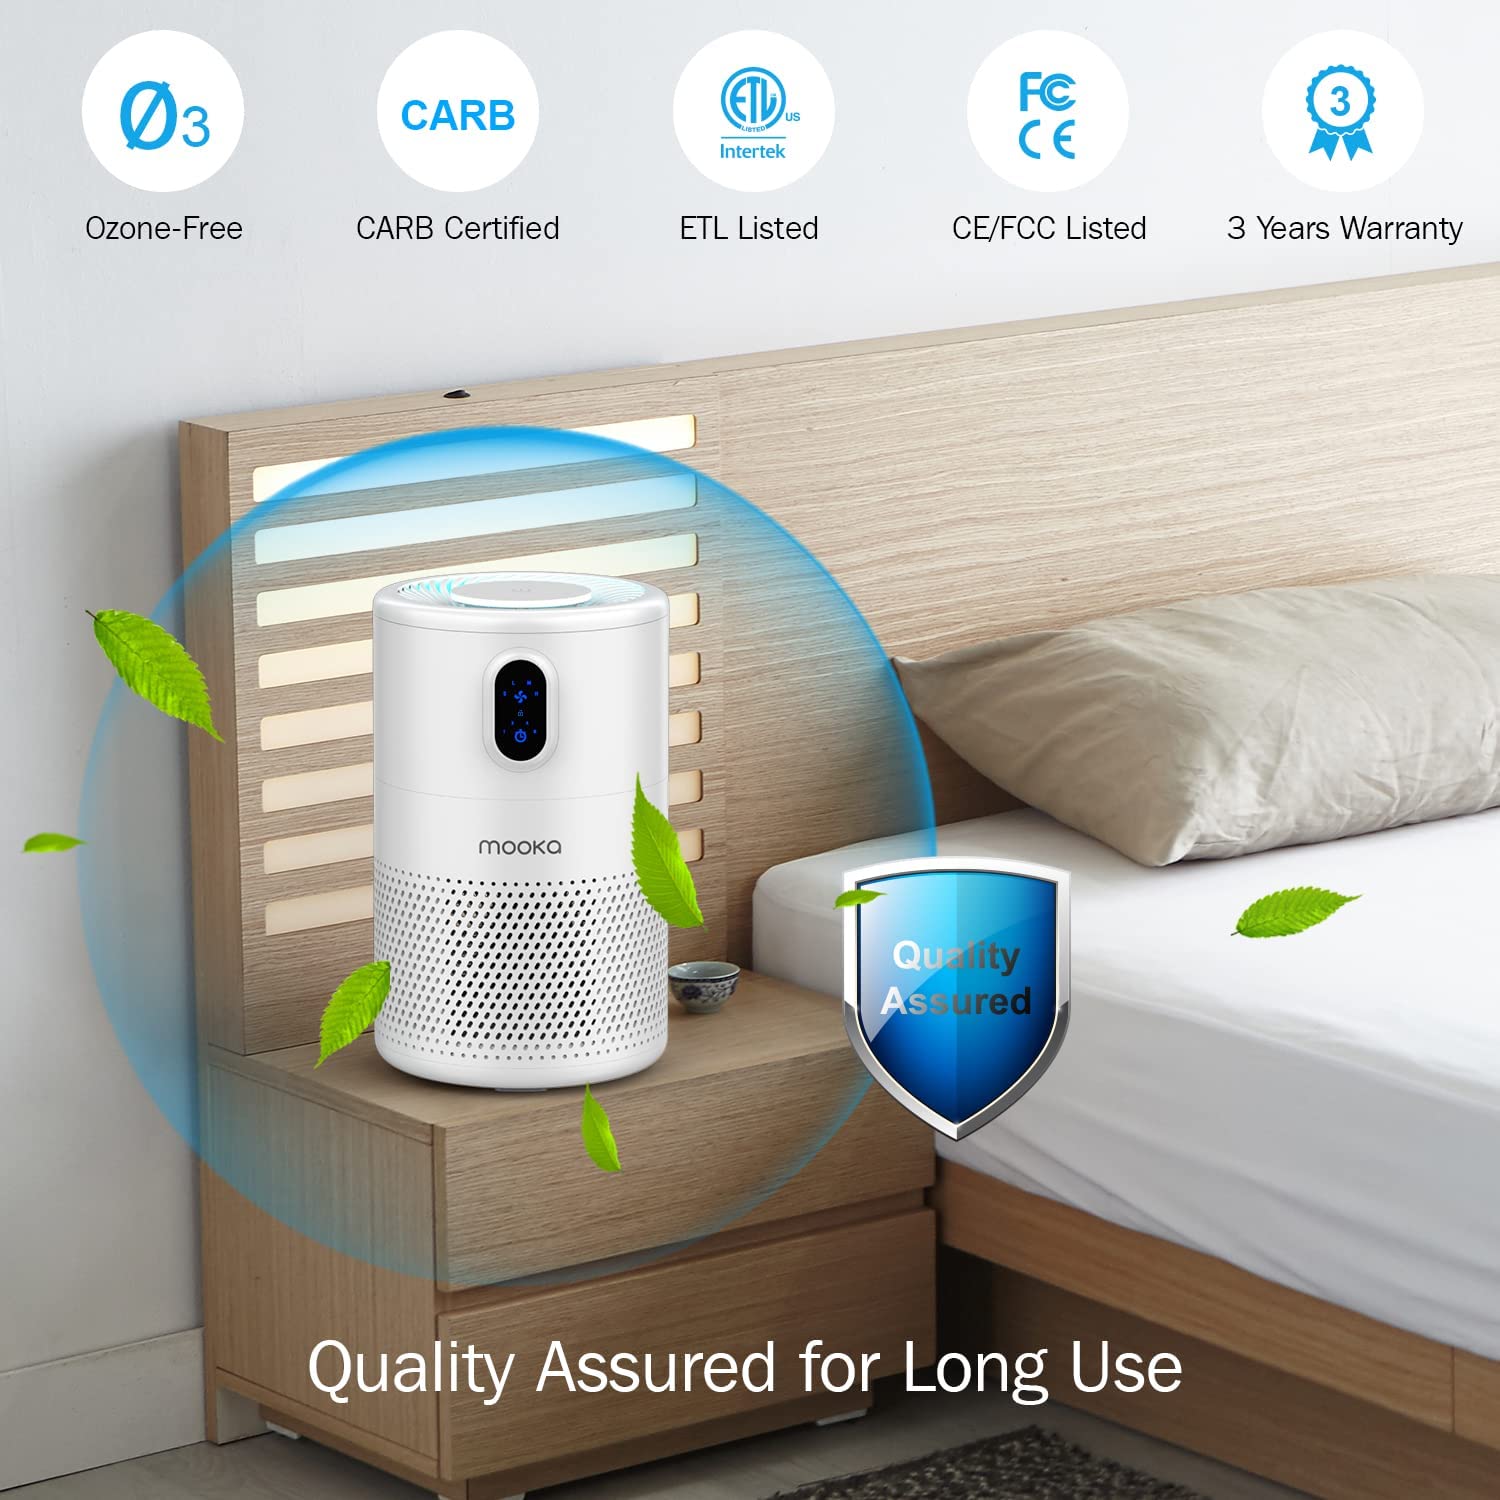 LEVOIT Air Purifiers for Home, HEPA Filter for Smoke, Dust and Pollen in  Bedroom, Ozone Free, Filtration System Odor Eliminators for Office with